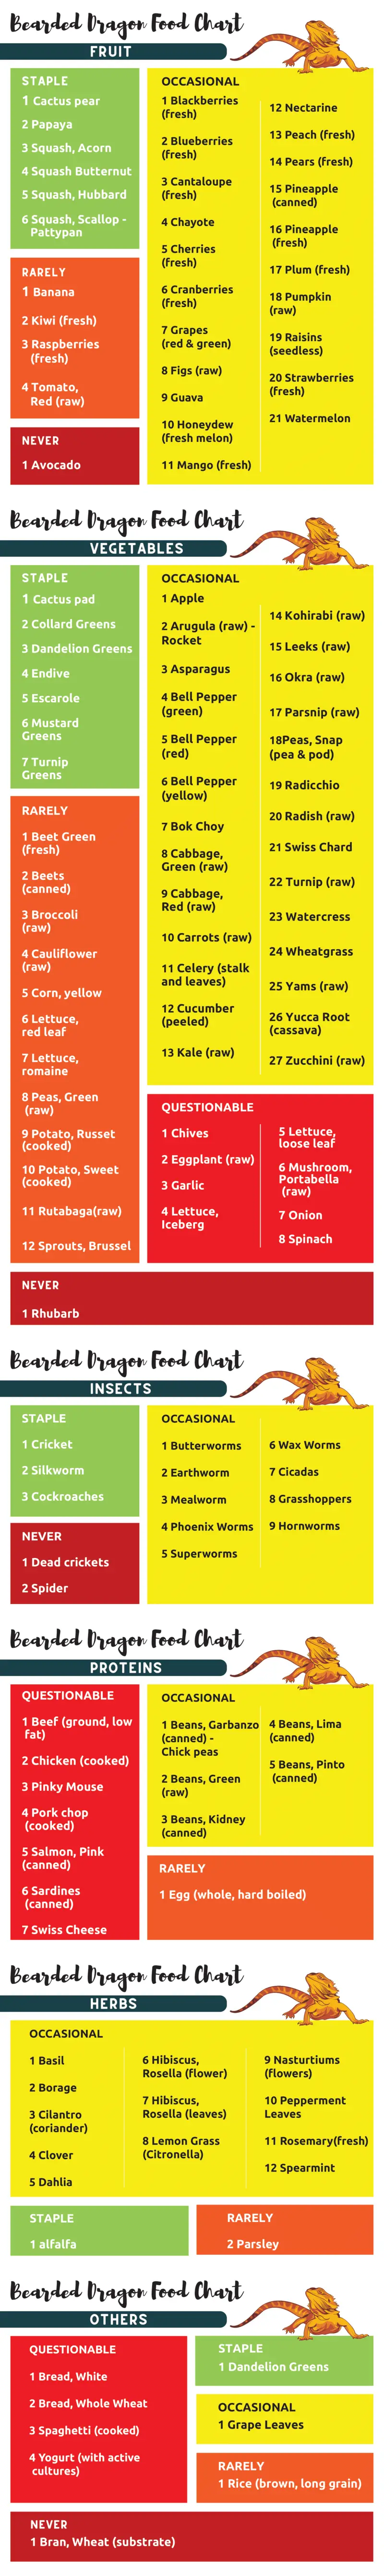 Infographic showing what bearded dragons eat